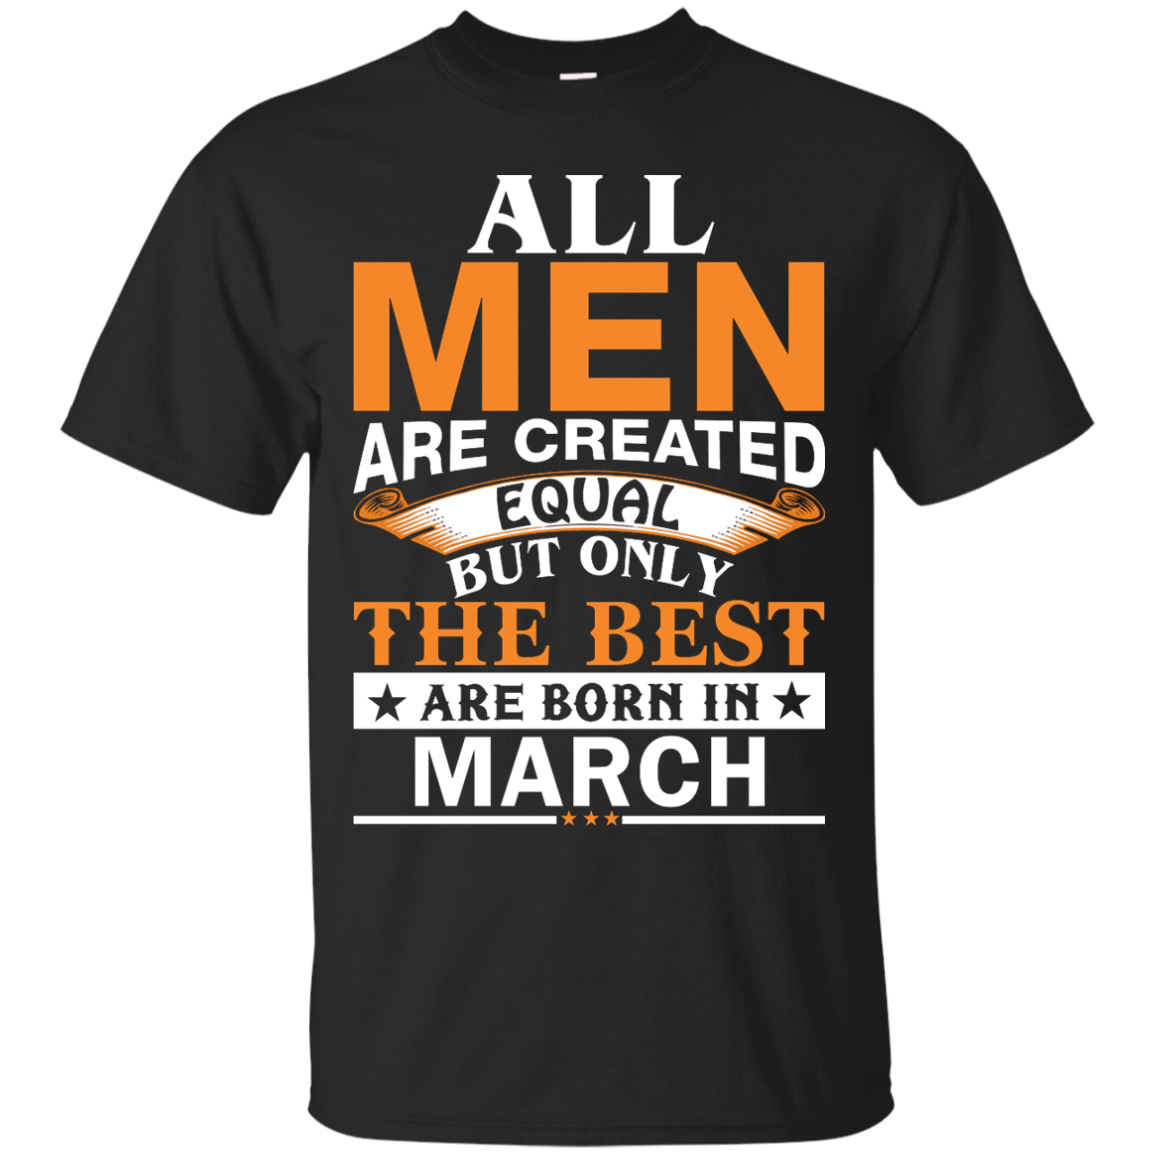 All Men Are Created Equal But Only The Best Are Born in March Shirt